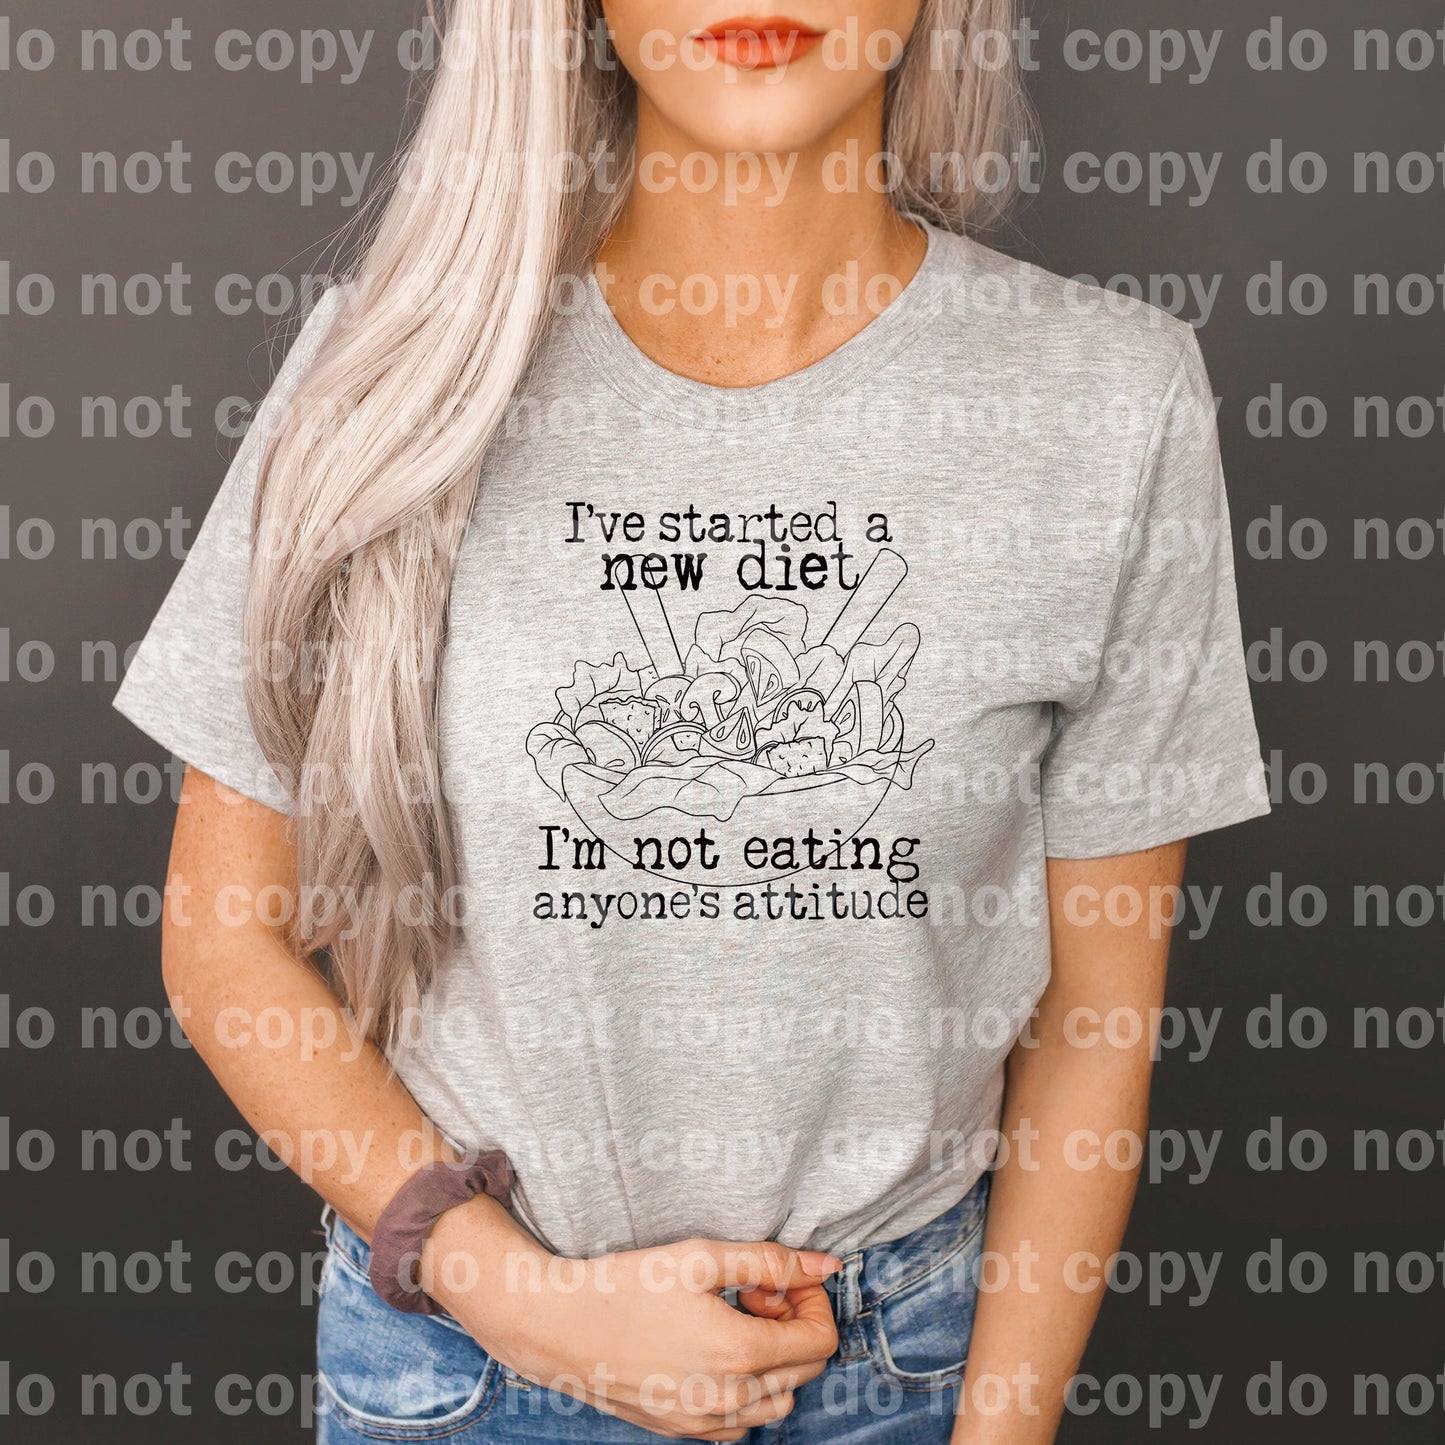 I Started A New Diet I'm Not Eating Anyone's Attitude Dream Print or Sublimation Print